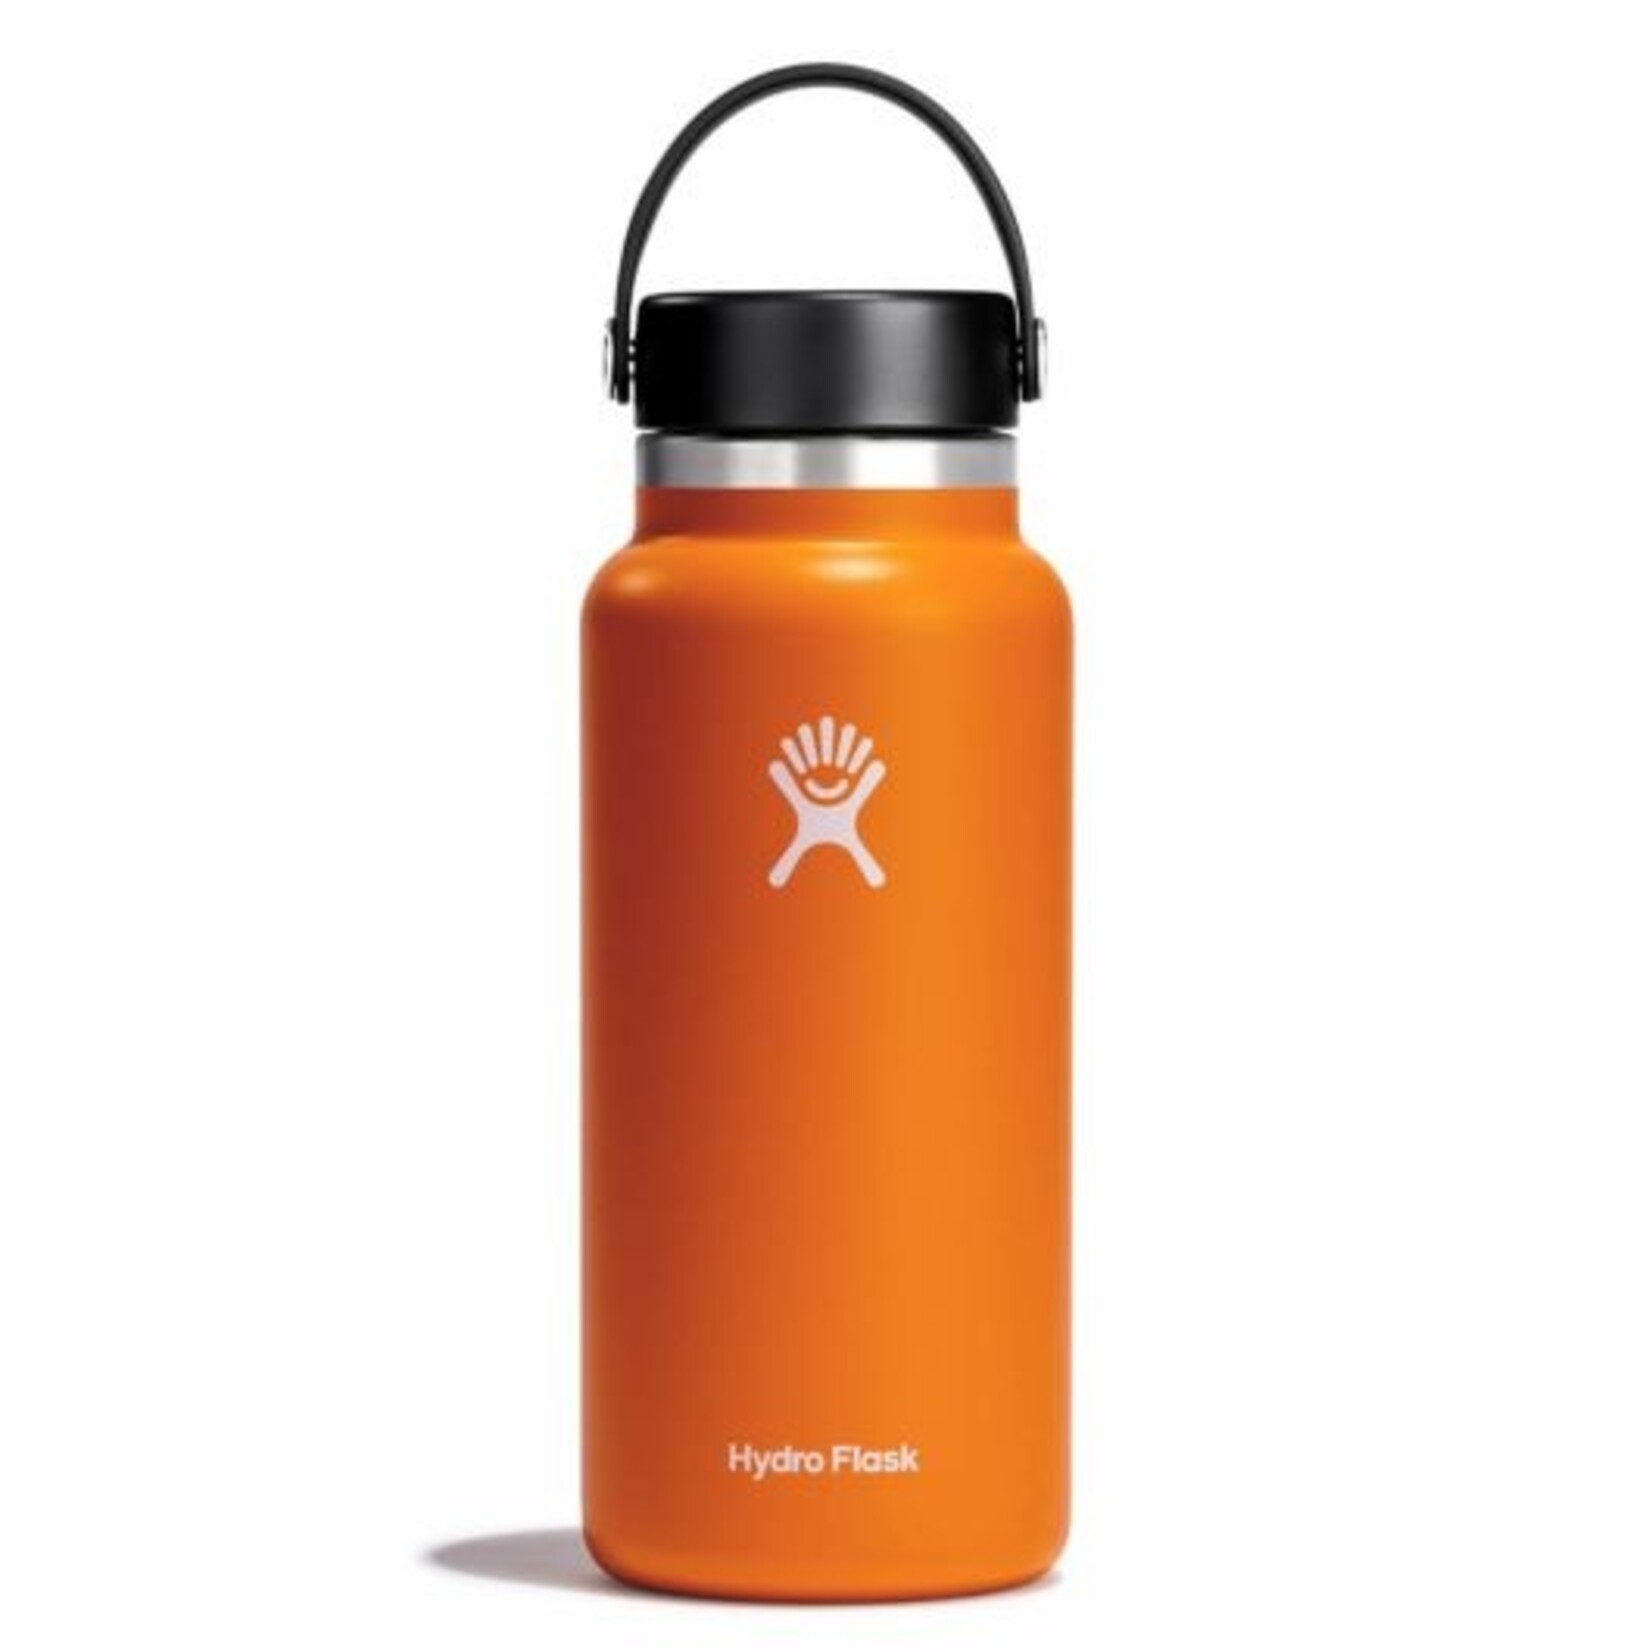 Hydro Flask 32oz wide mouth with flex cap